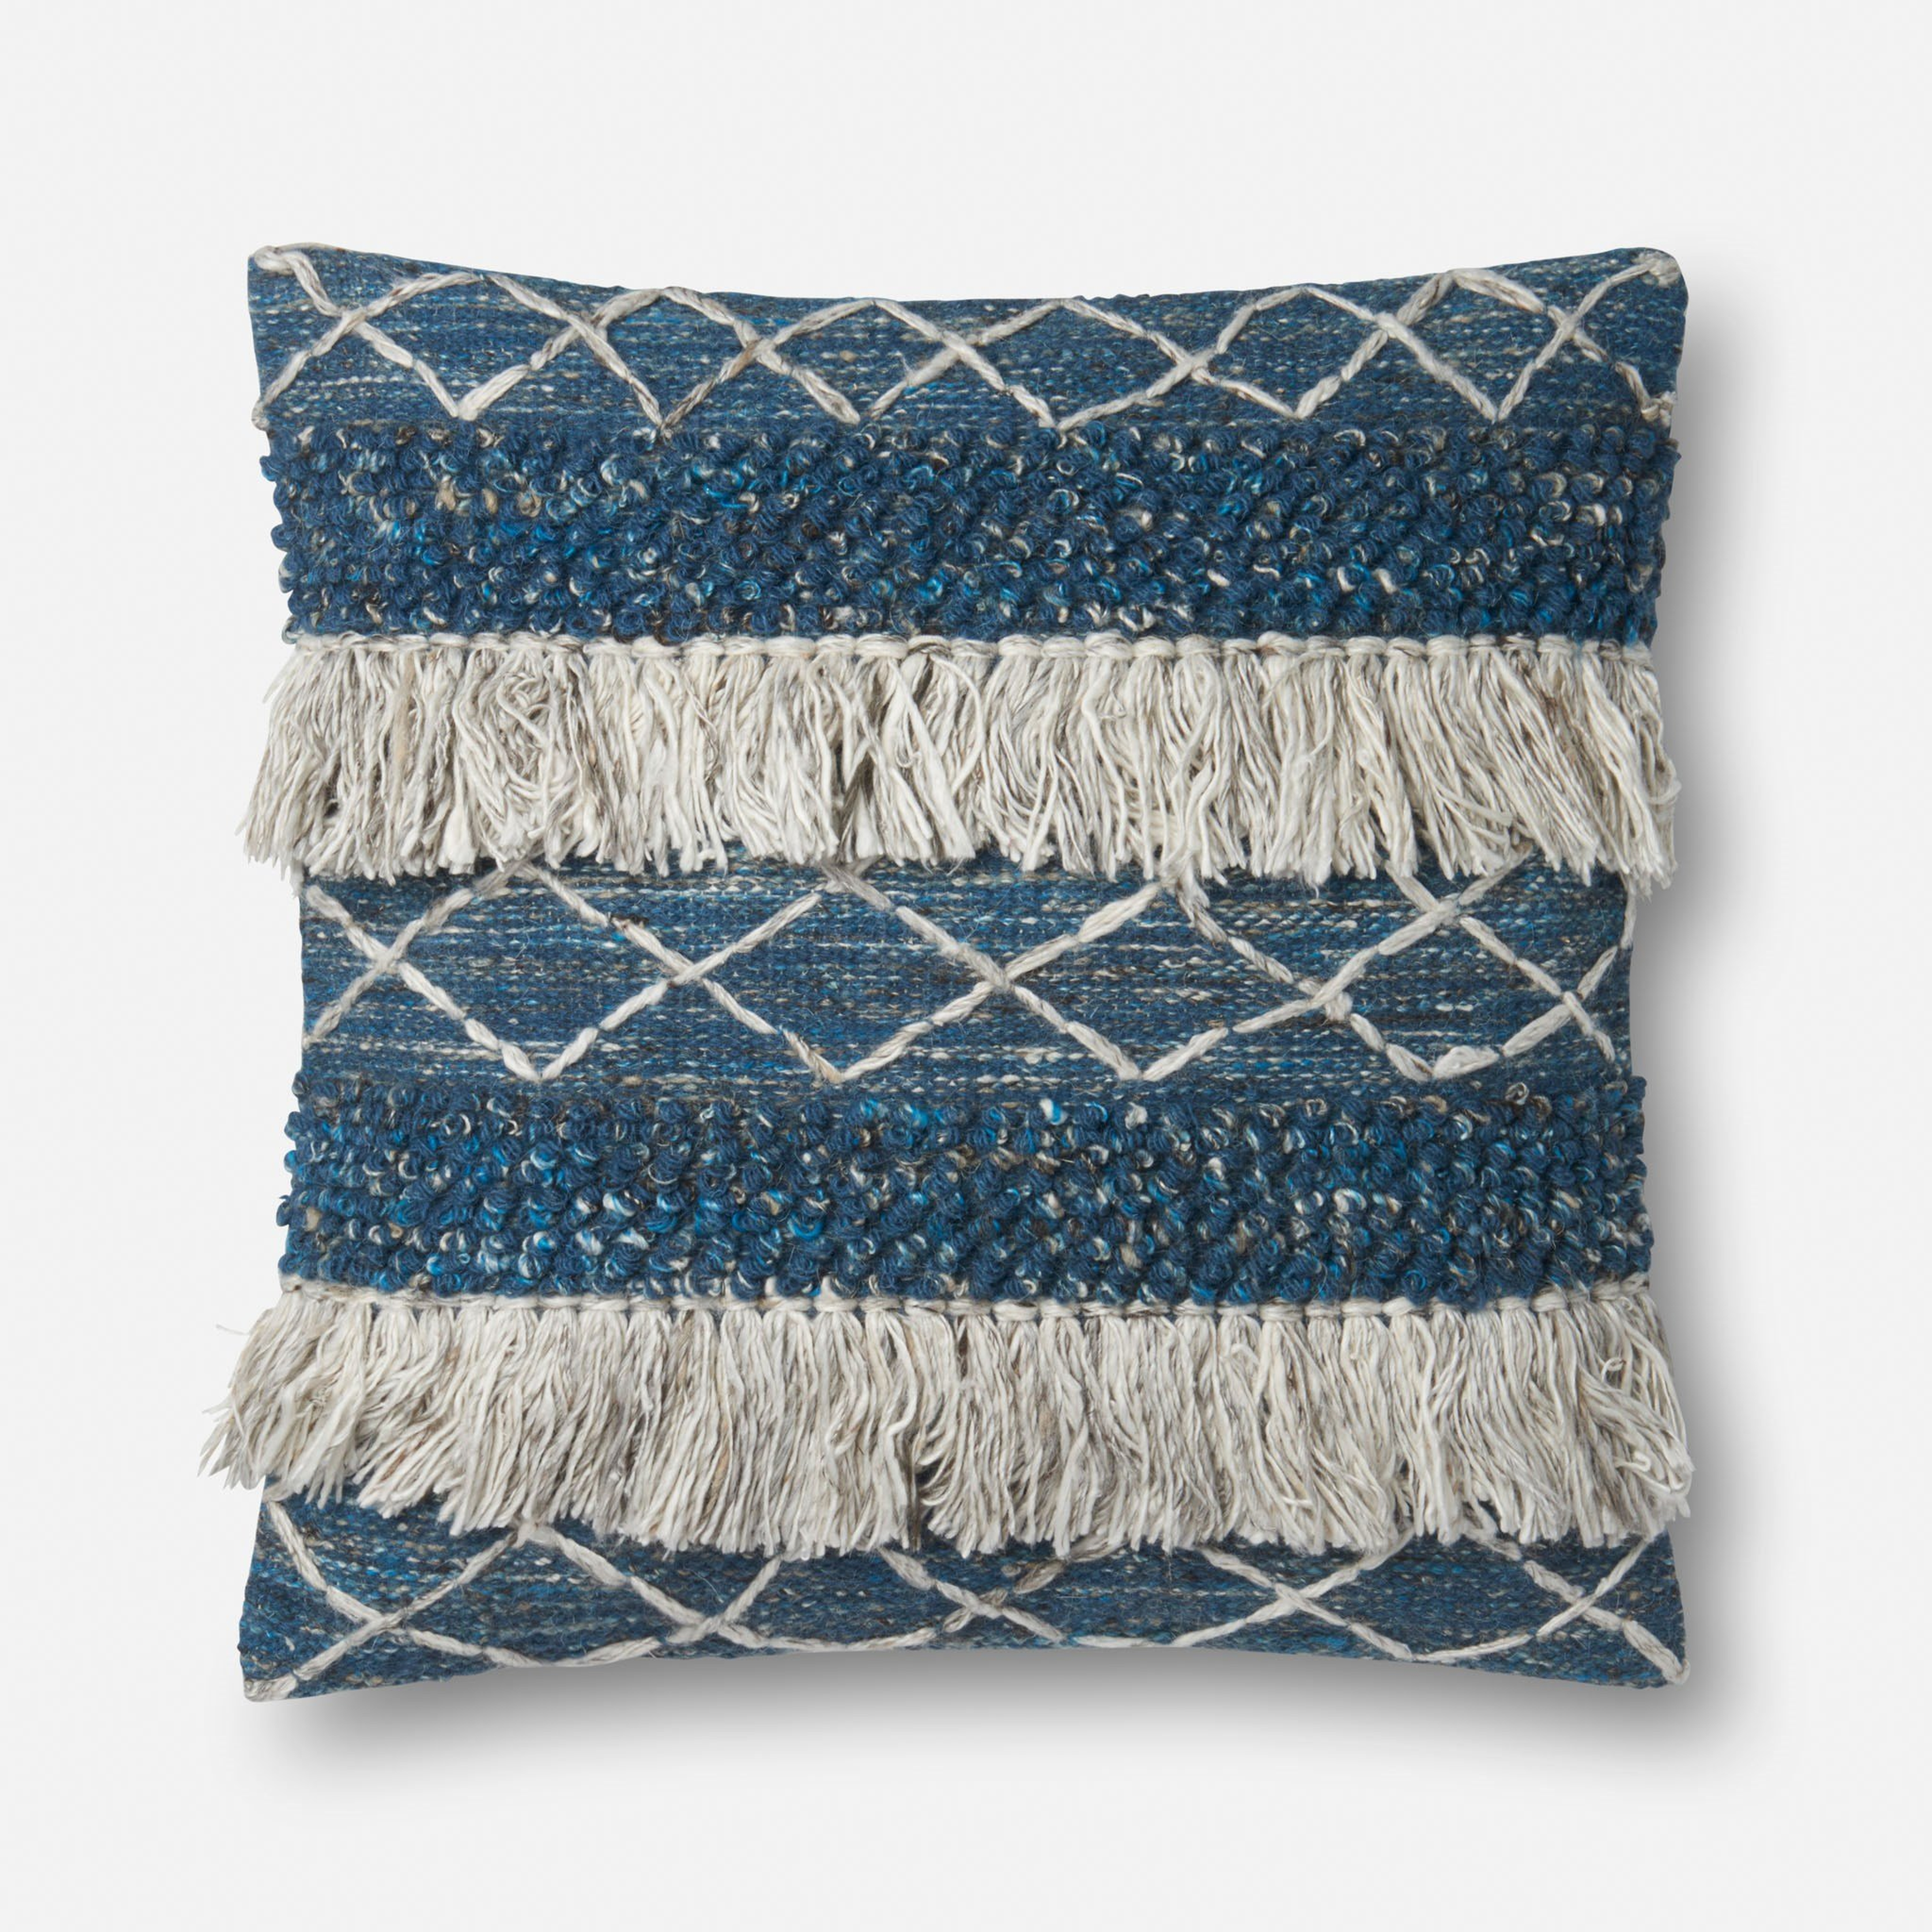 PILLOWS - BLUE / IVORY - 22" X 22" Cover w/Down - Loloi Rugs